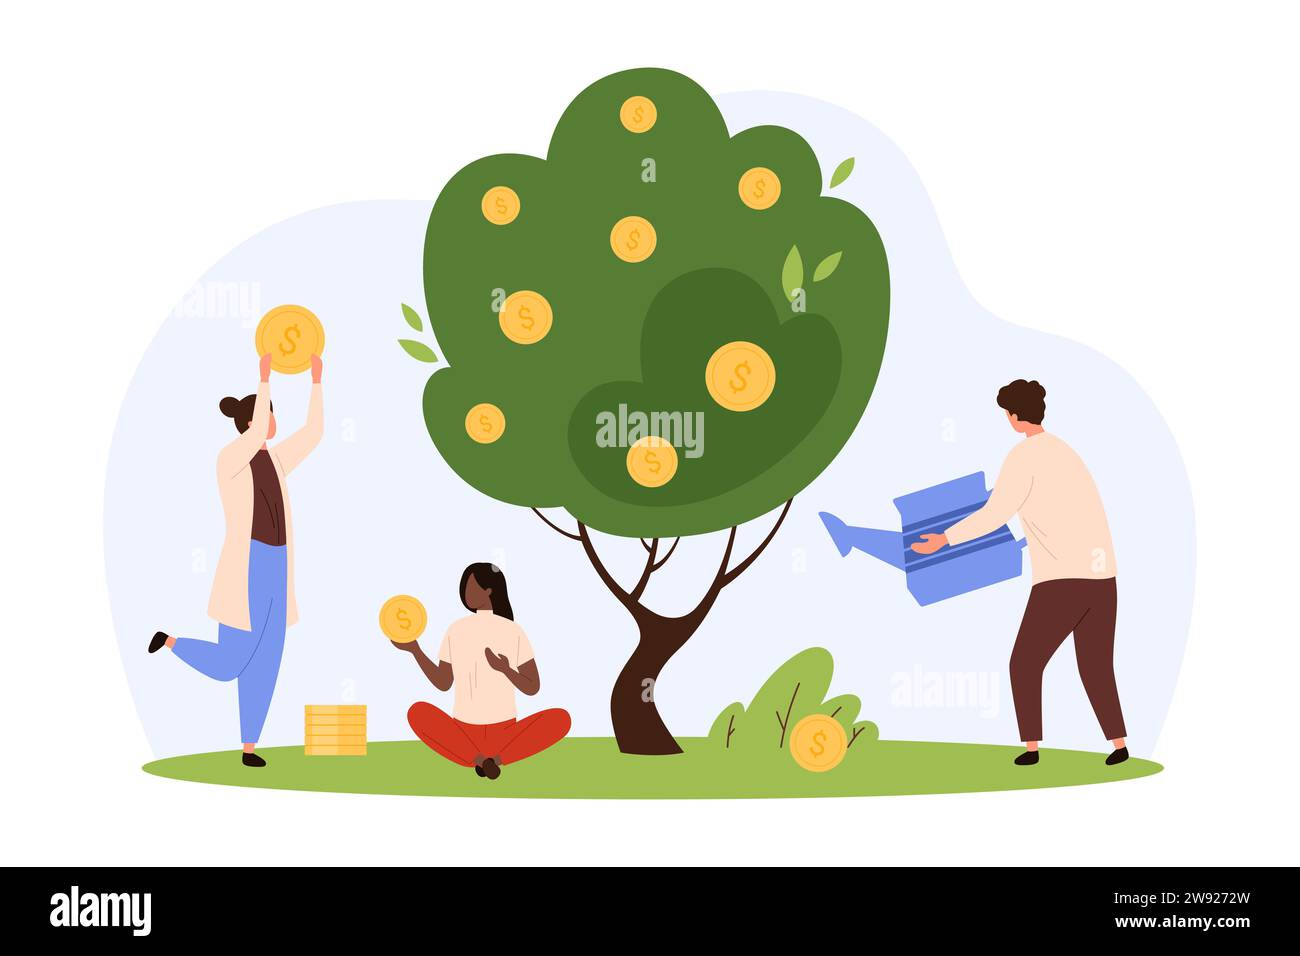 Financial investment growth, increase earning profit and capital gain vector illustration. Cartoon tiny people watering money tree, investors growing plant with gold dollar coins, success strategy Stock Vector